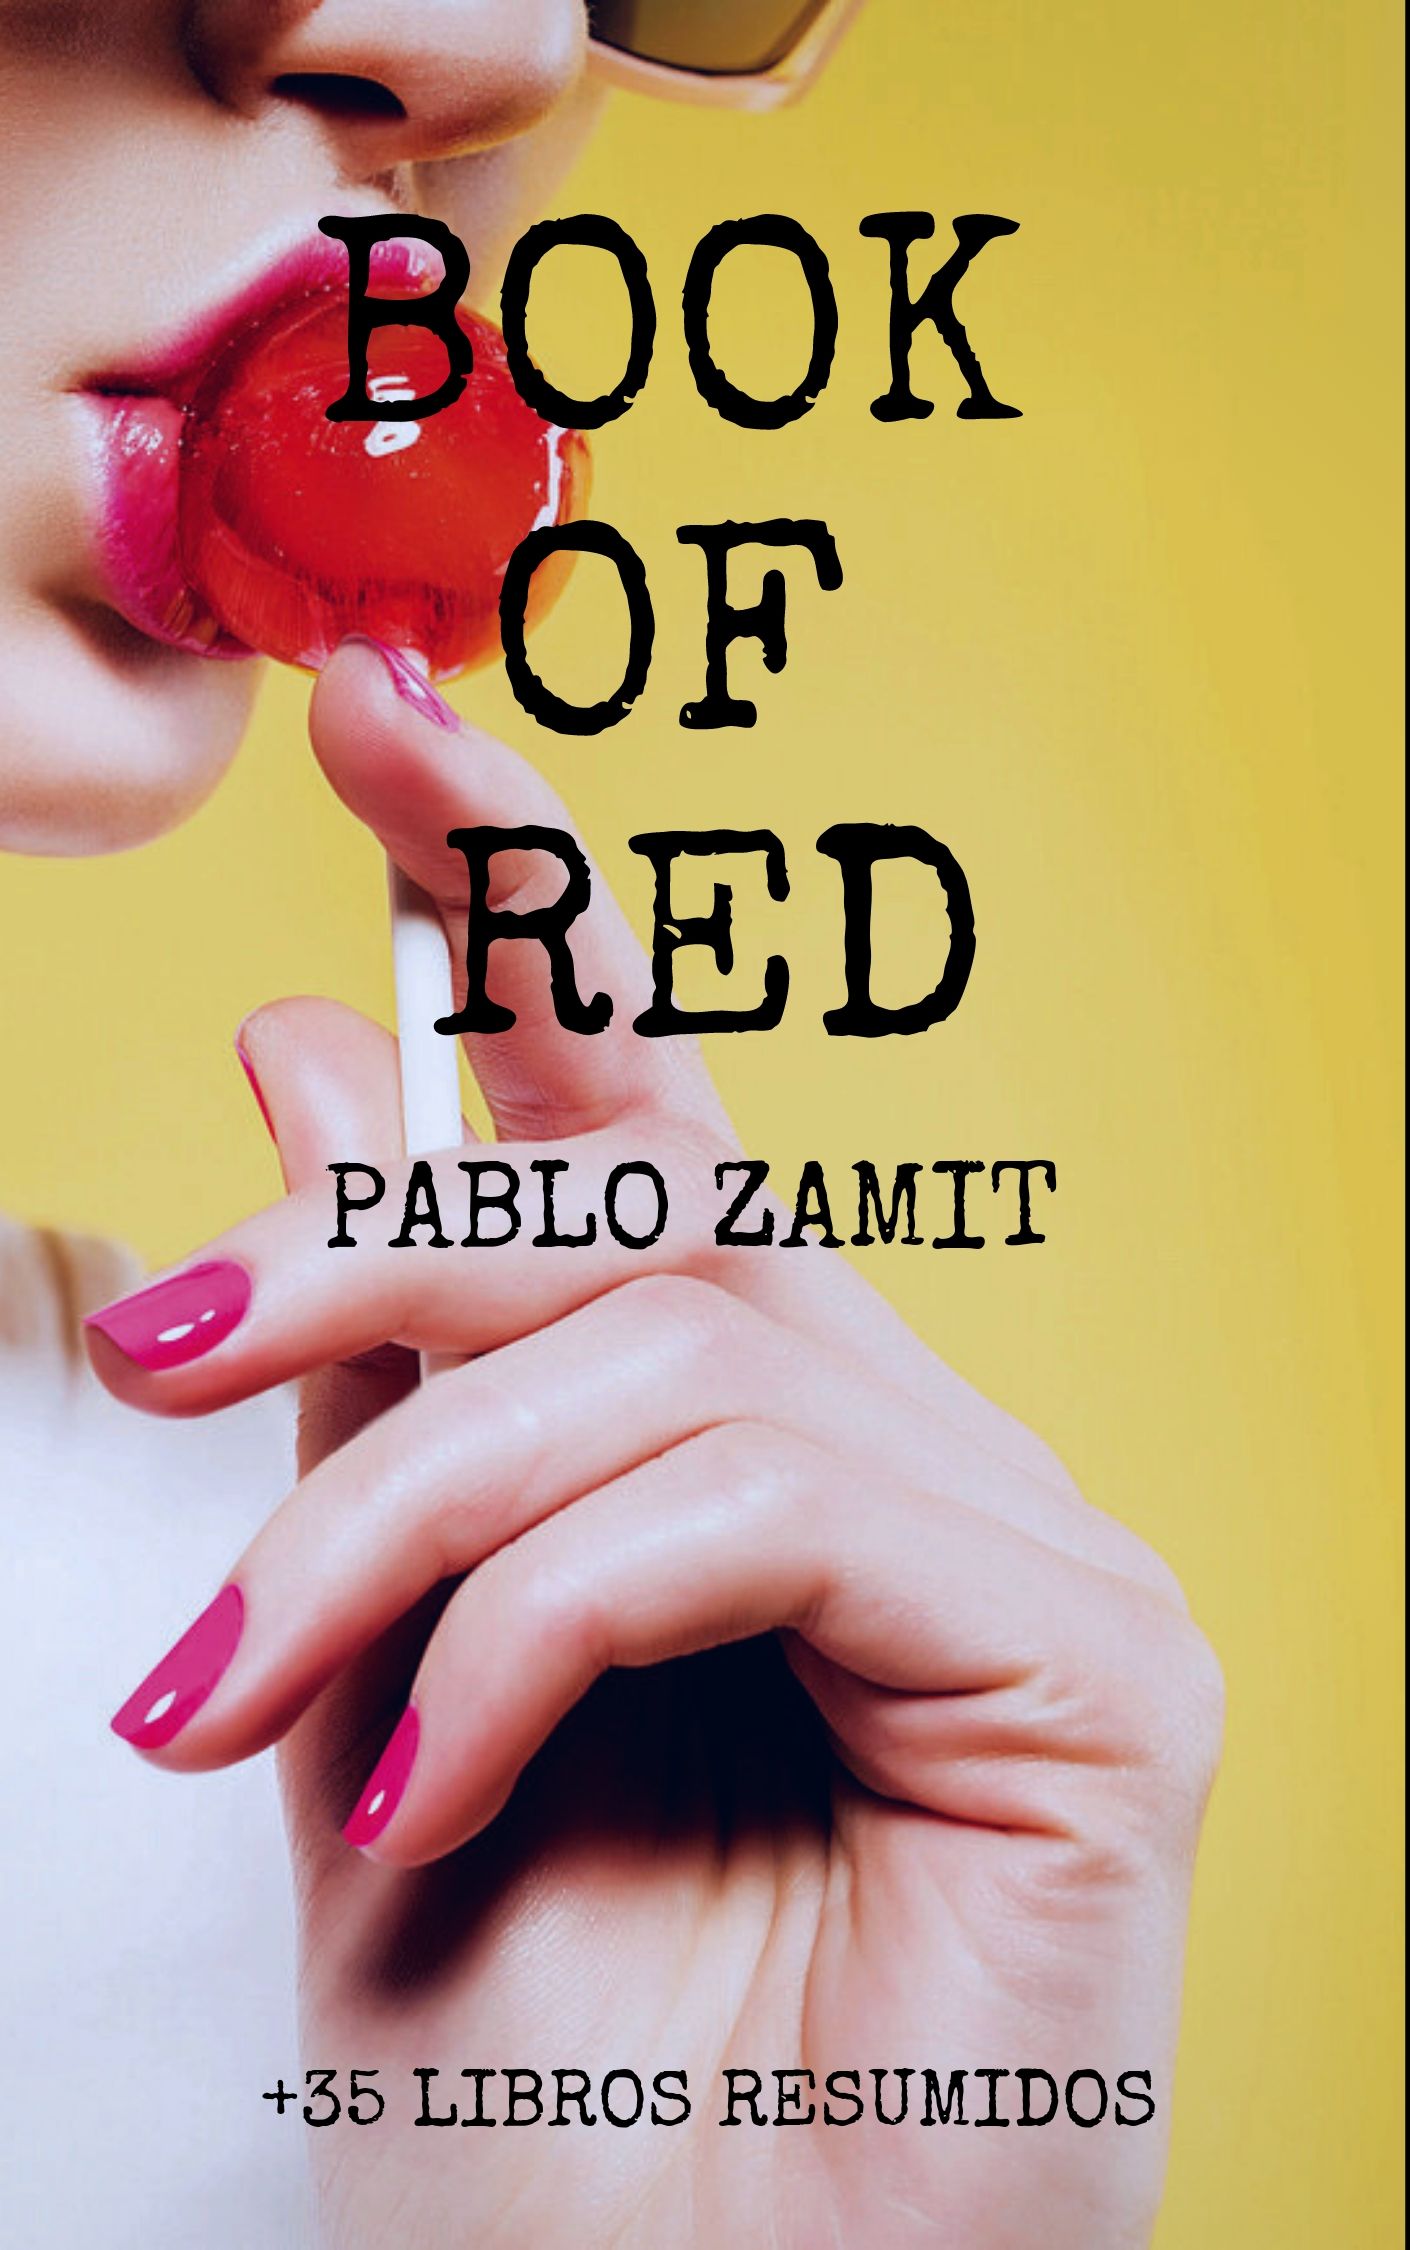 book-of-red.jpg